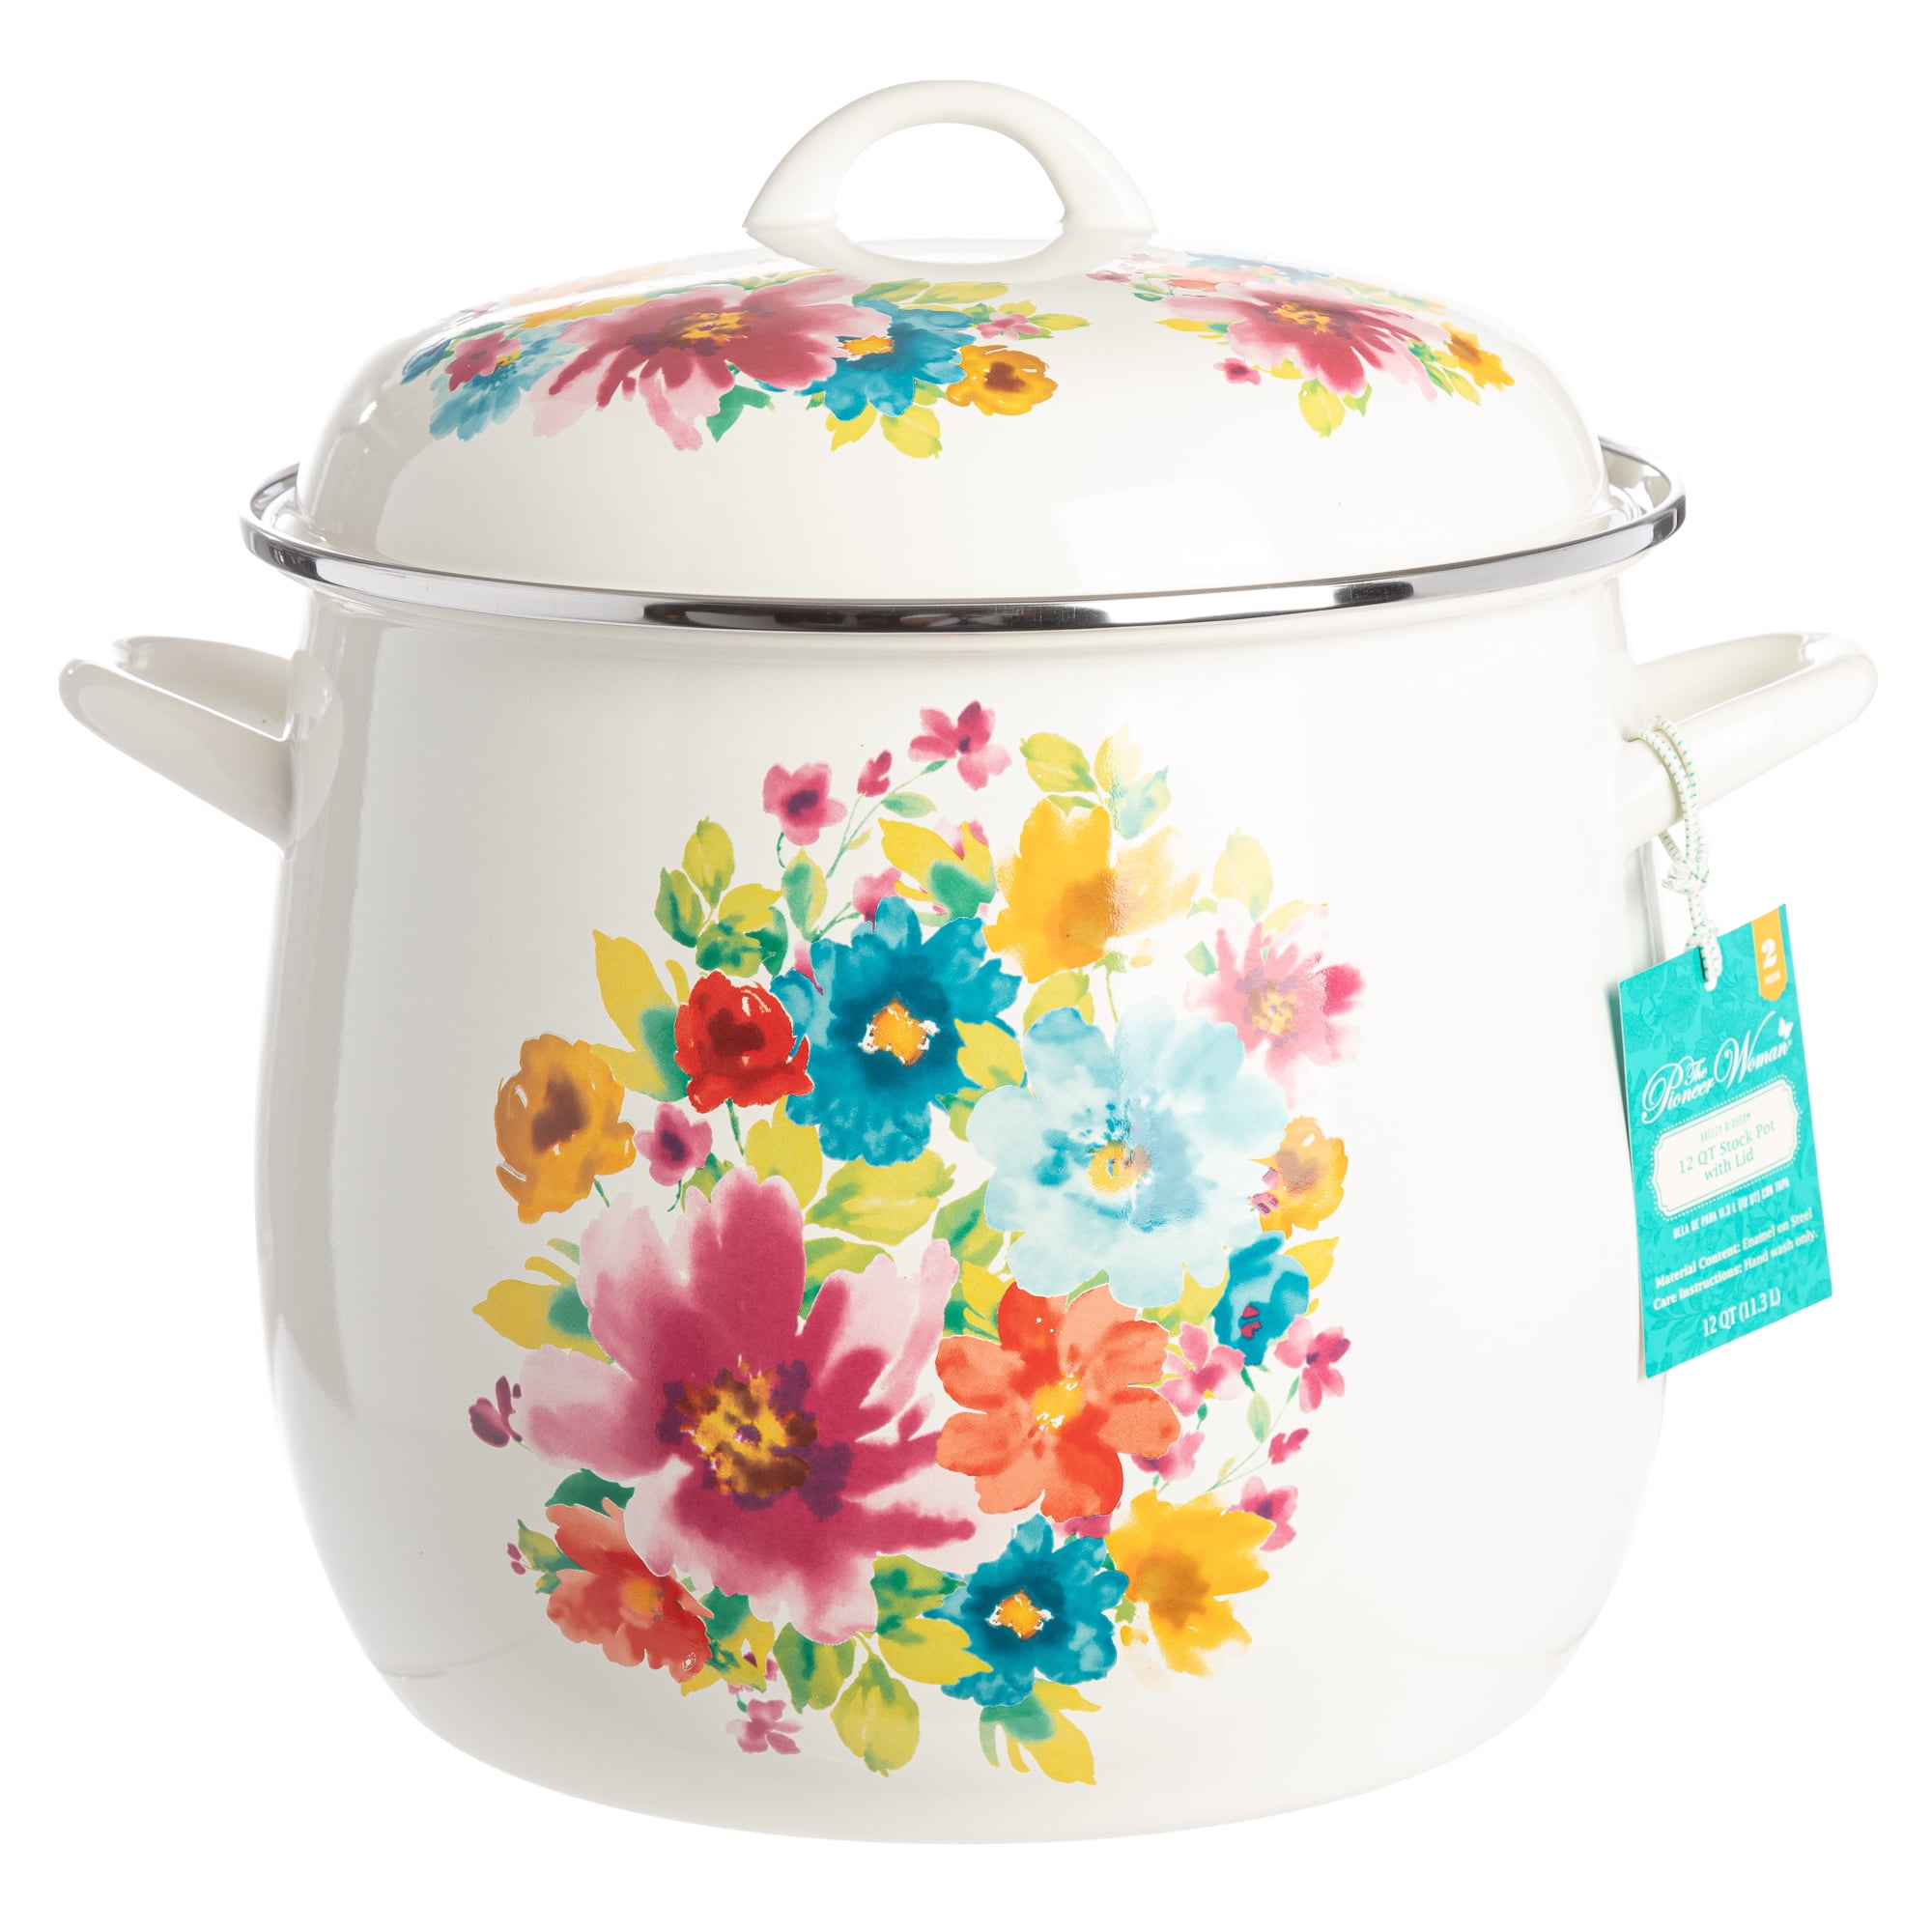 The Pioneer Woman 7qt Stock Pot With Steamer - AliExpress